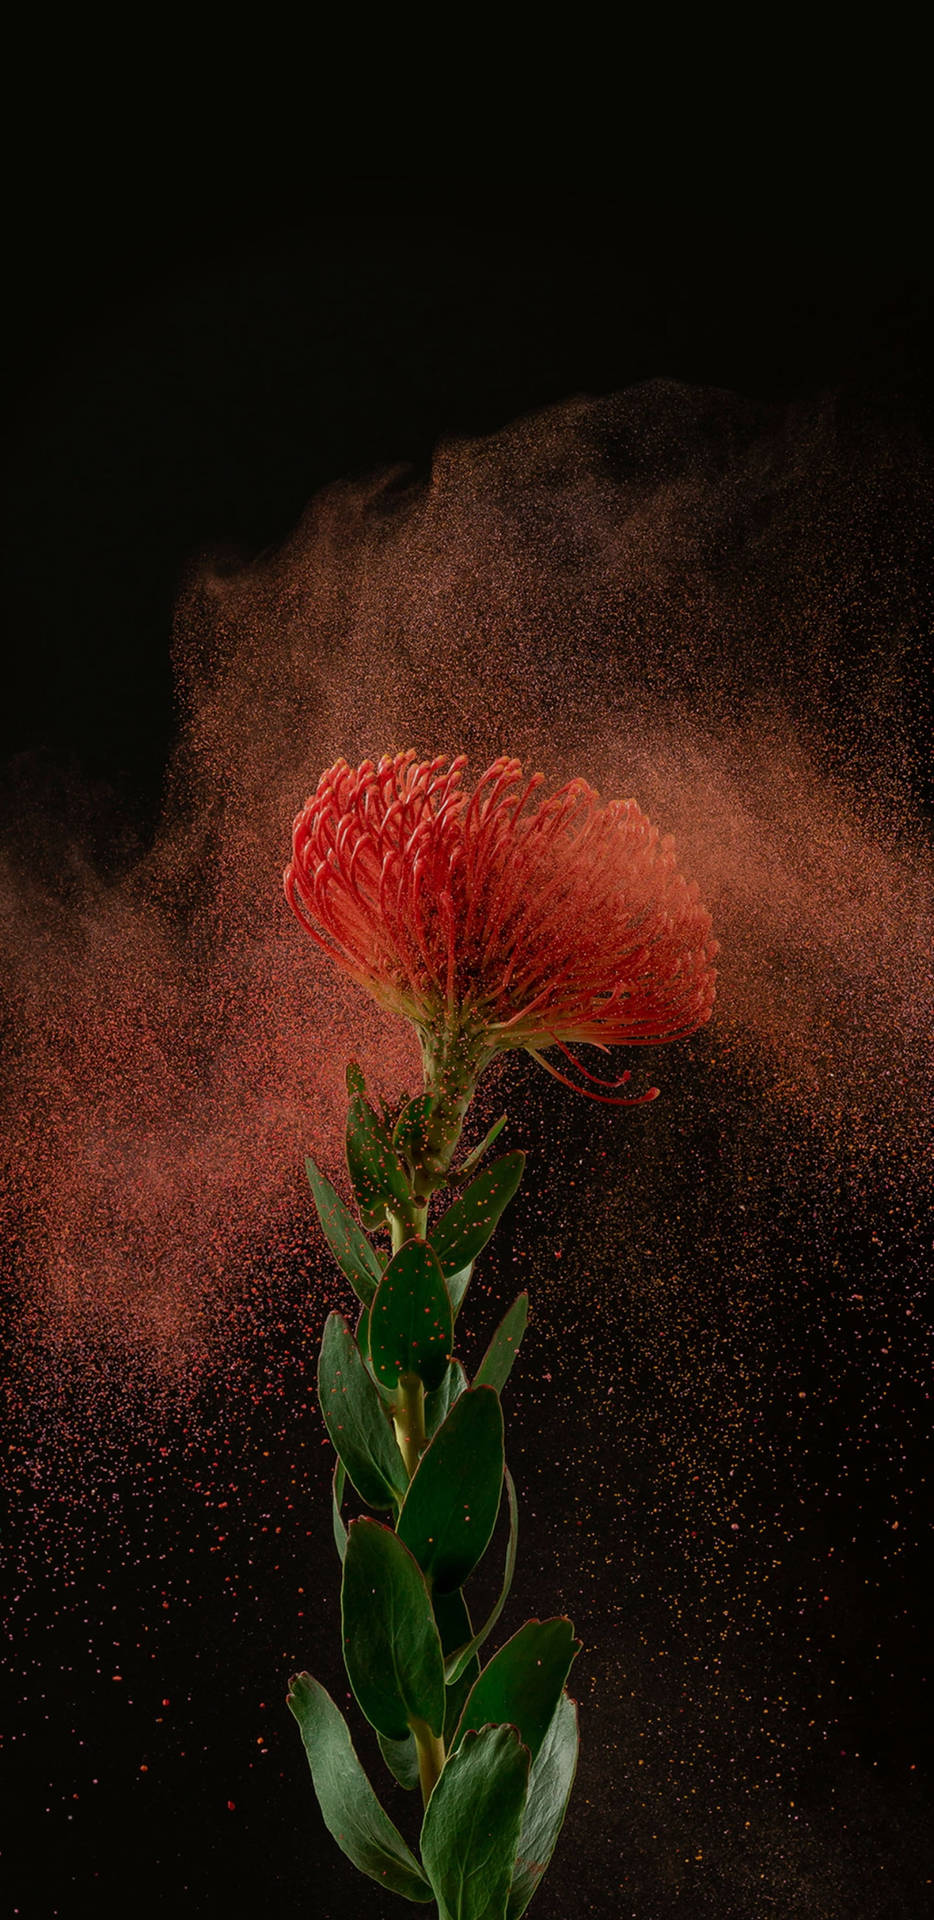 Vibrant Red Flower in 2K AMOLED Display- Vibrant colors with stunning clarity Wallpaper